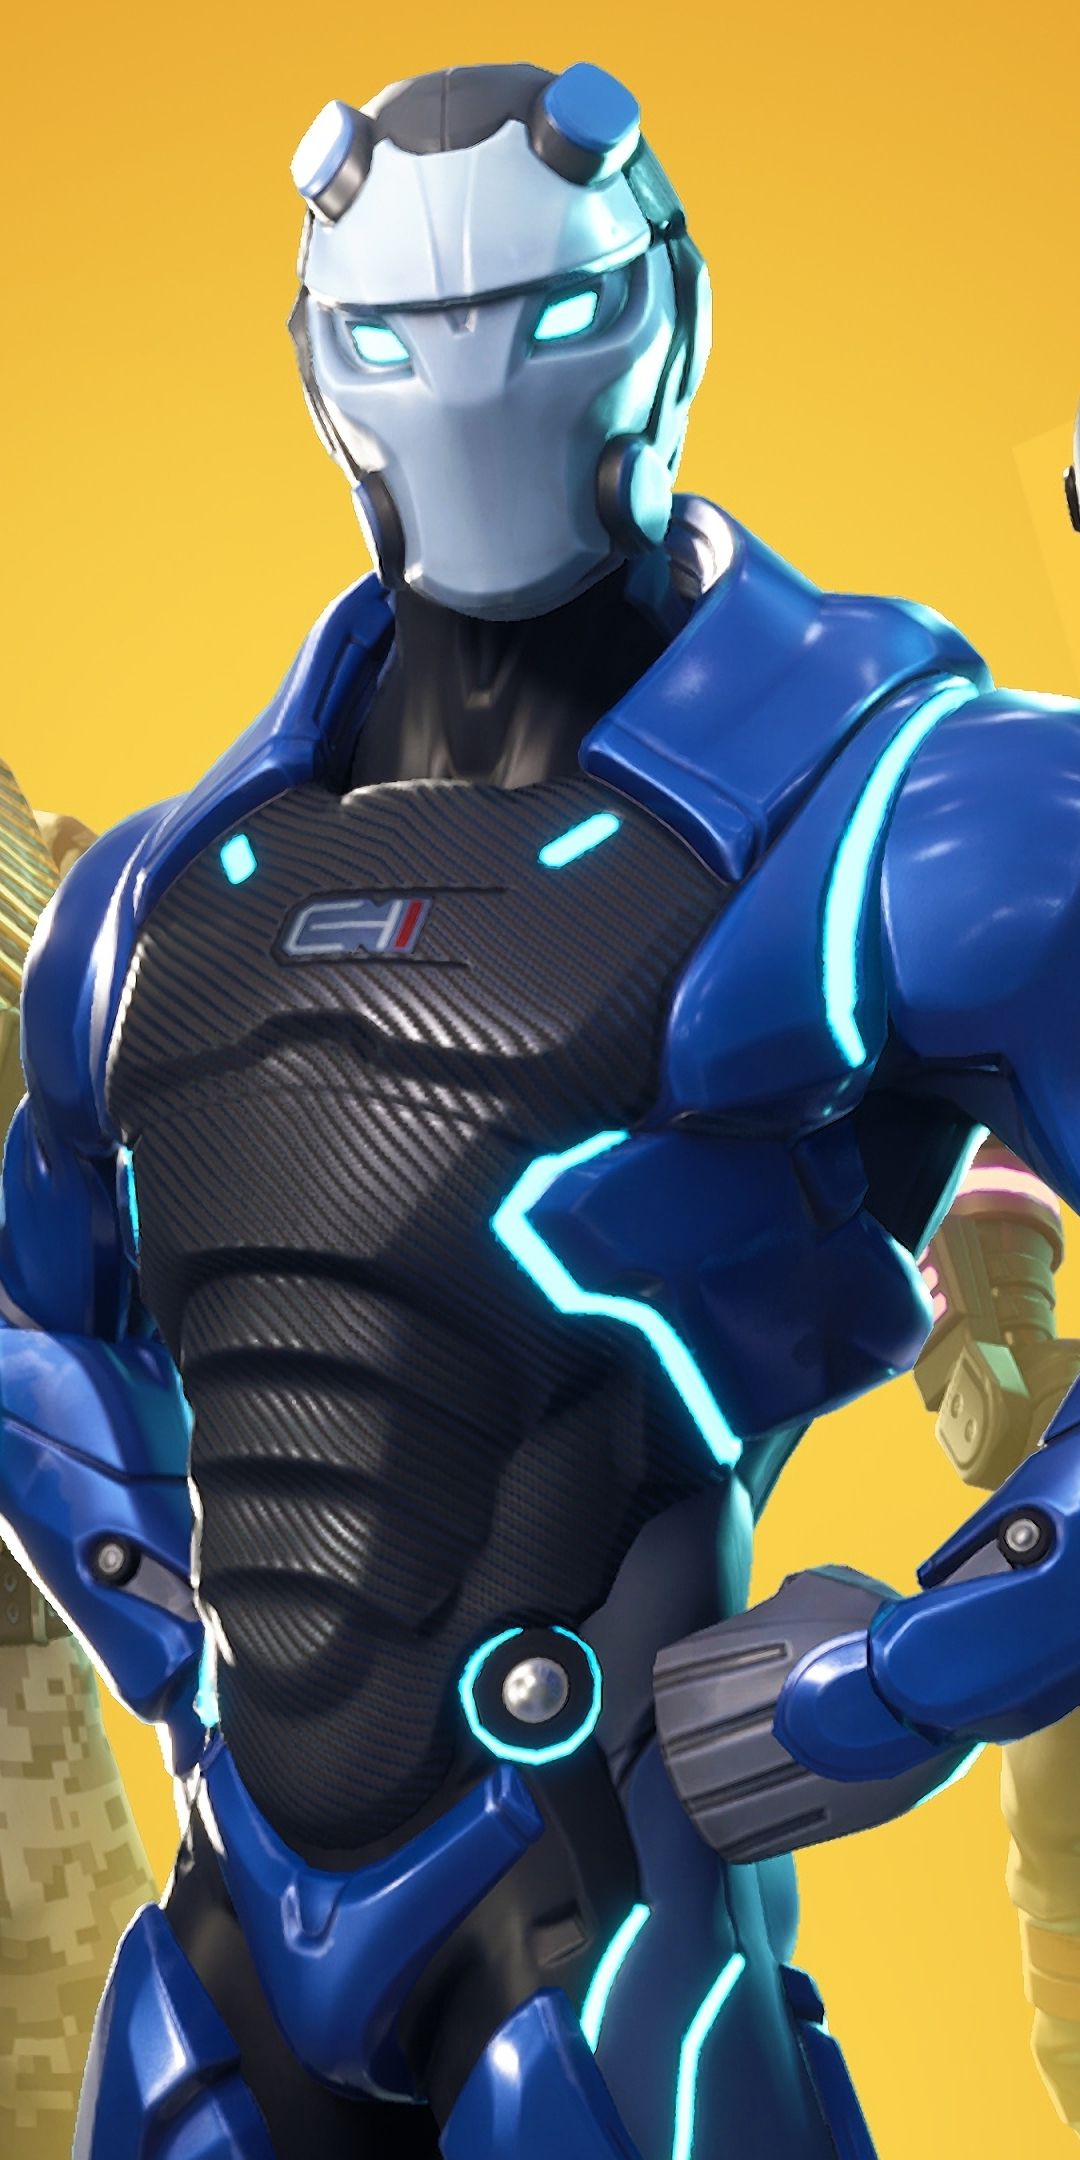 Fortnite, famous, online video game, skin characters, 1080x2160 wallpaper